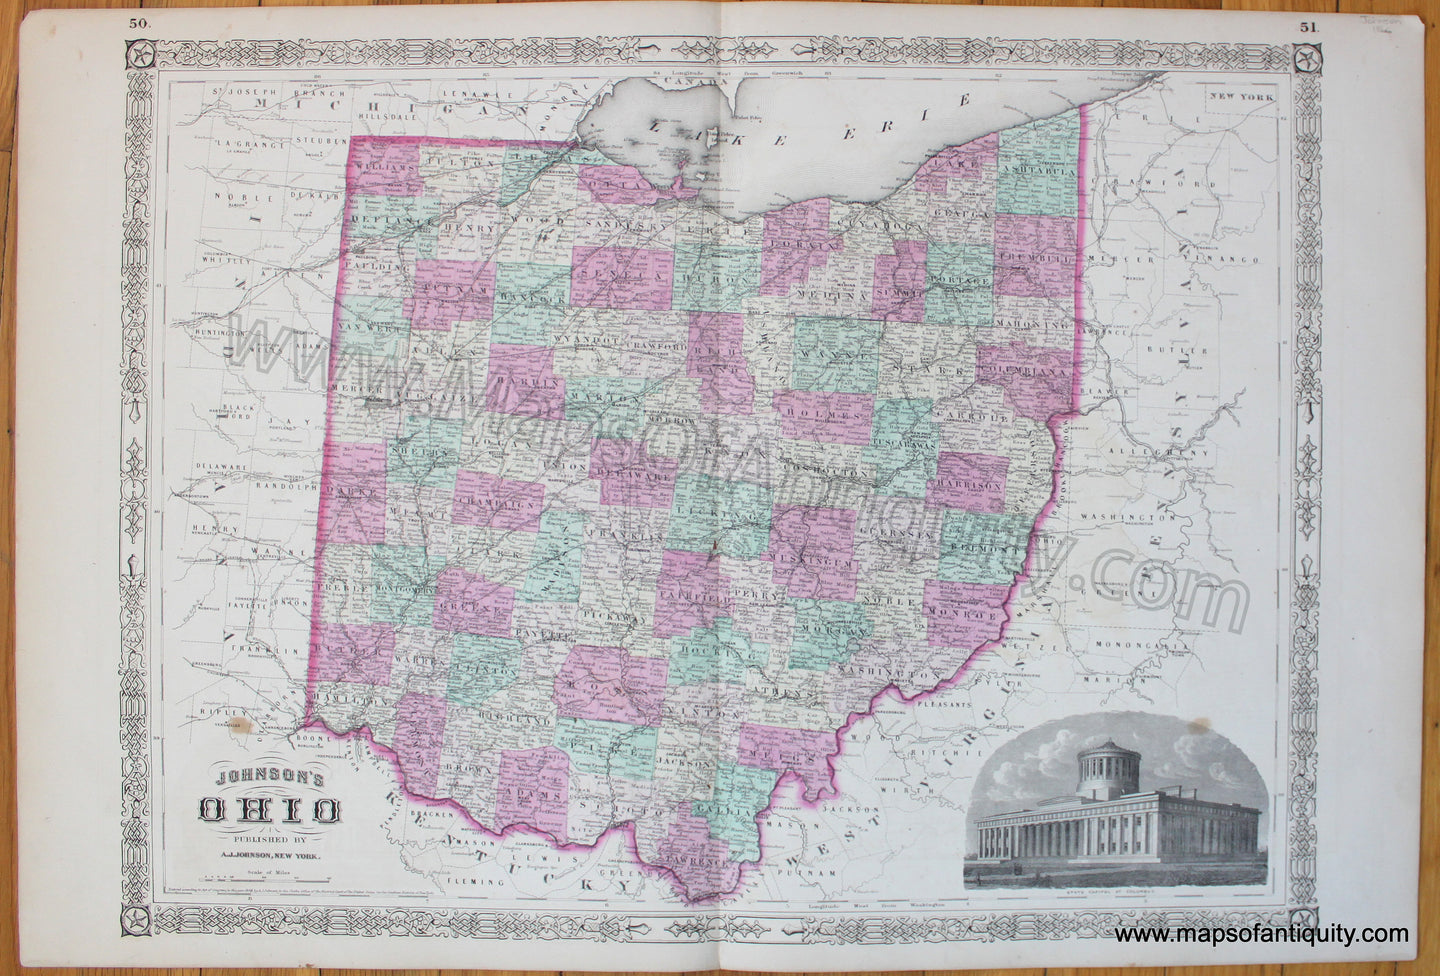 Antique-Map-Johnson's-Ohio-Johnson-1866-1860s-1800s-19th-Century-America-American-Midwest-Midwestern-States-Maps-of-Antiquity